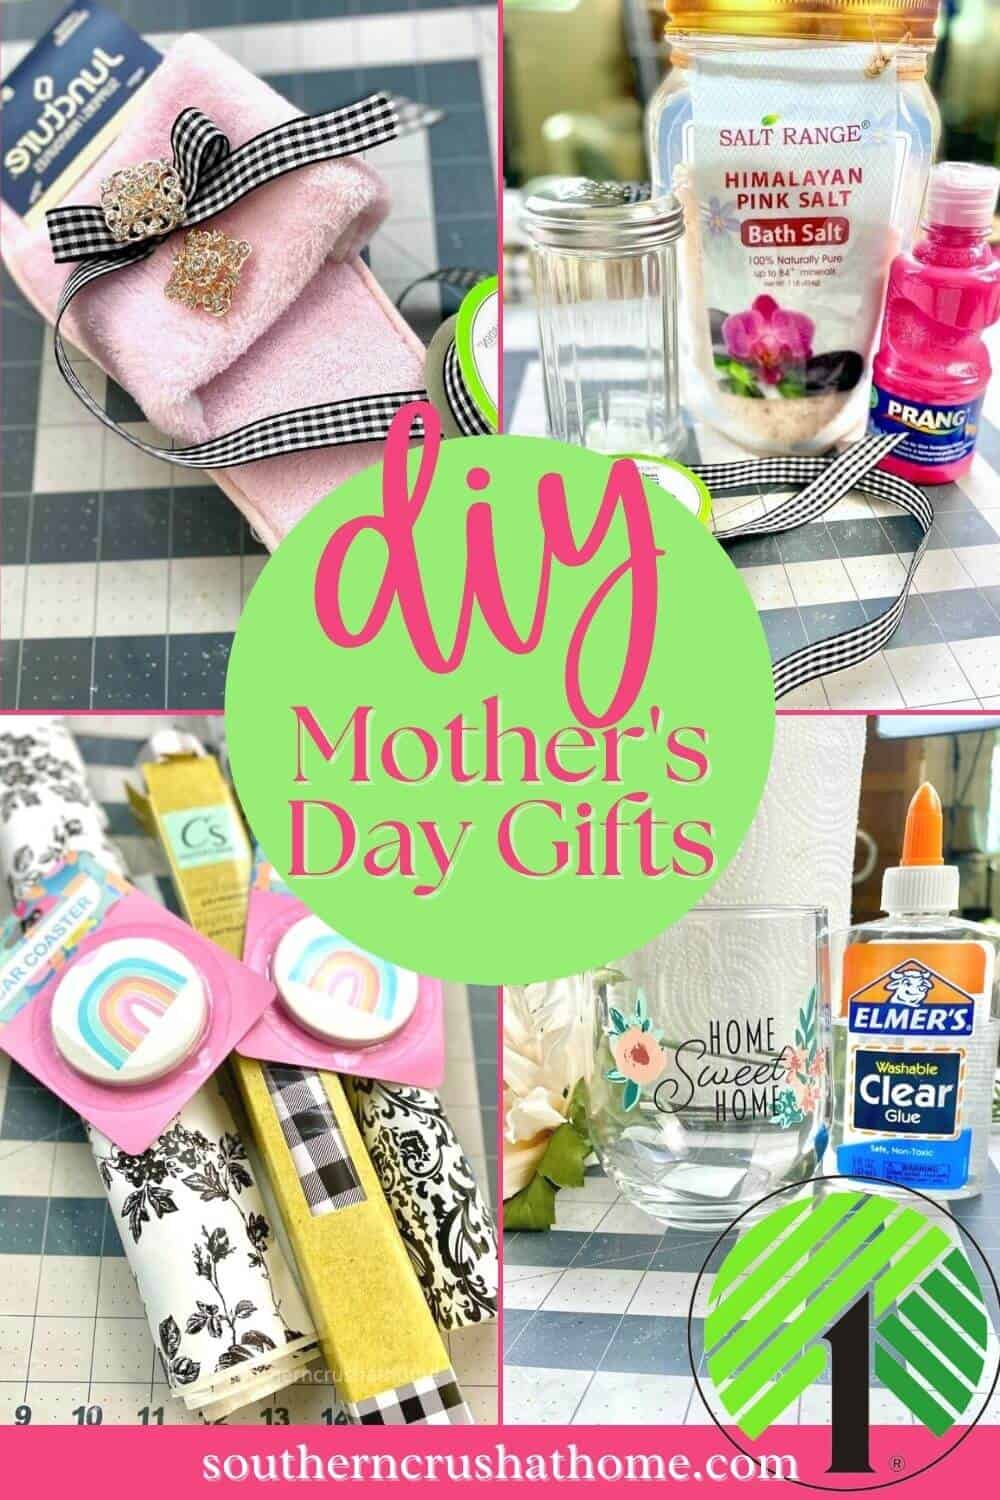 Five Clutter Free Gifts to Give Mom this Mother's Day